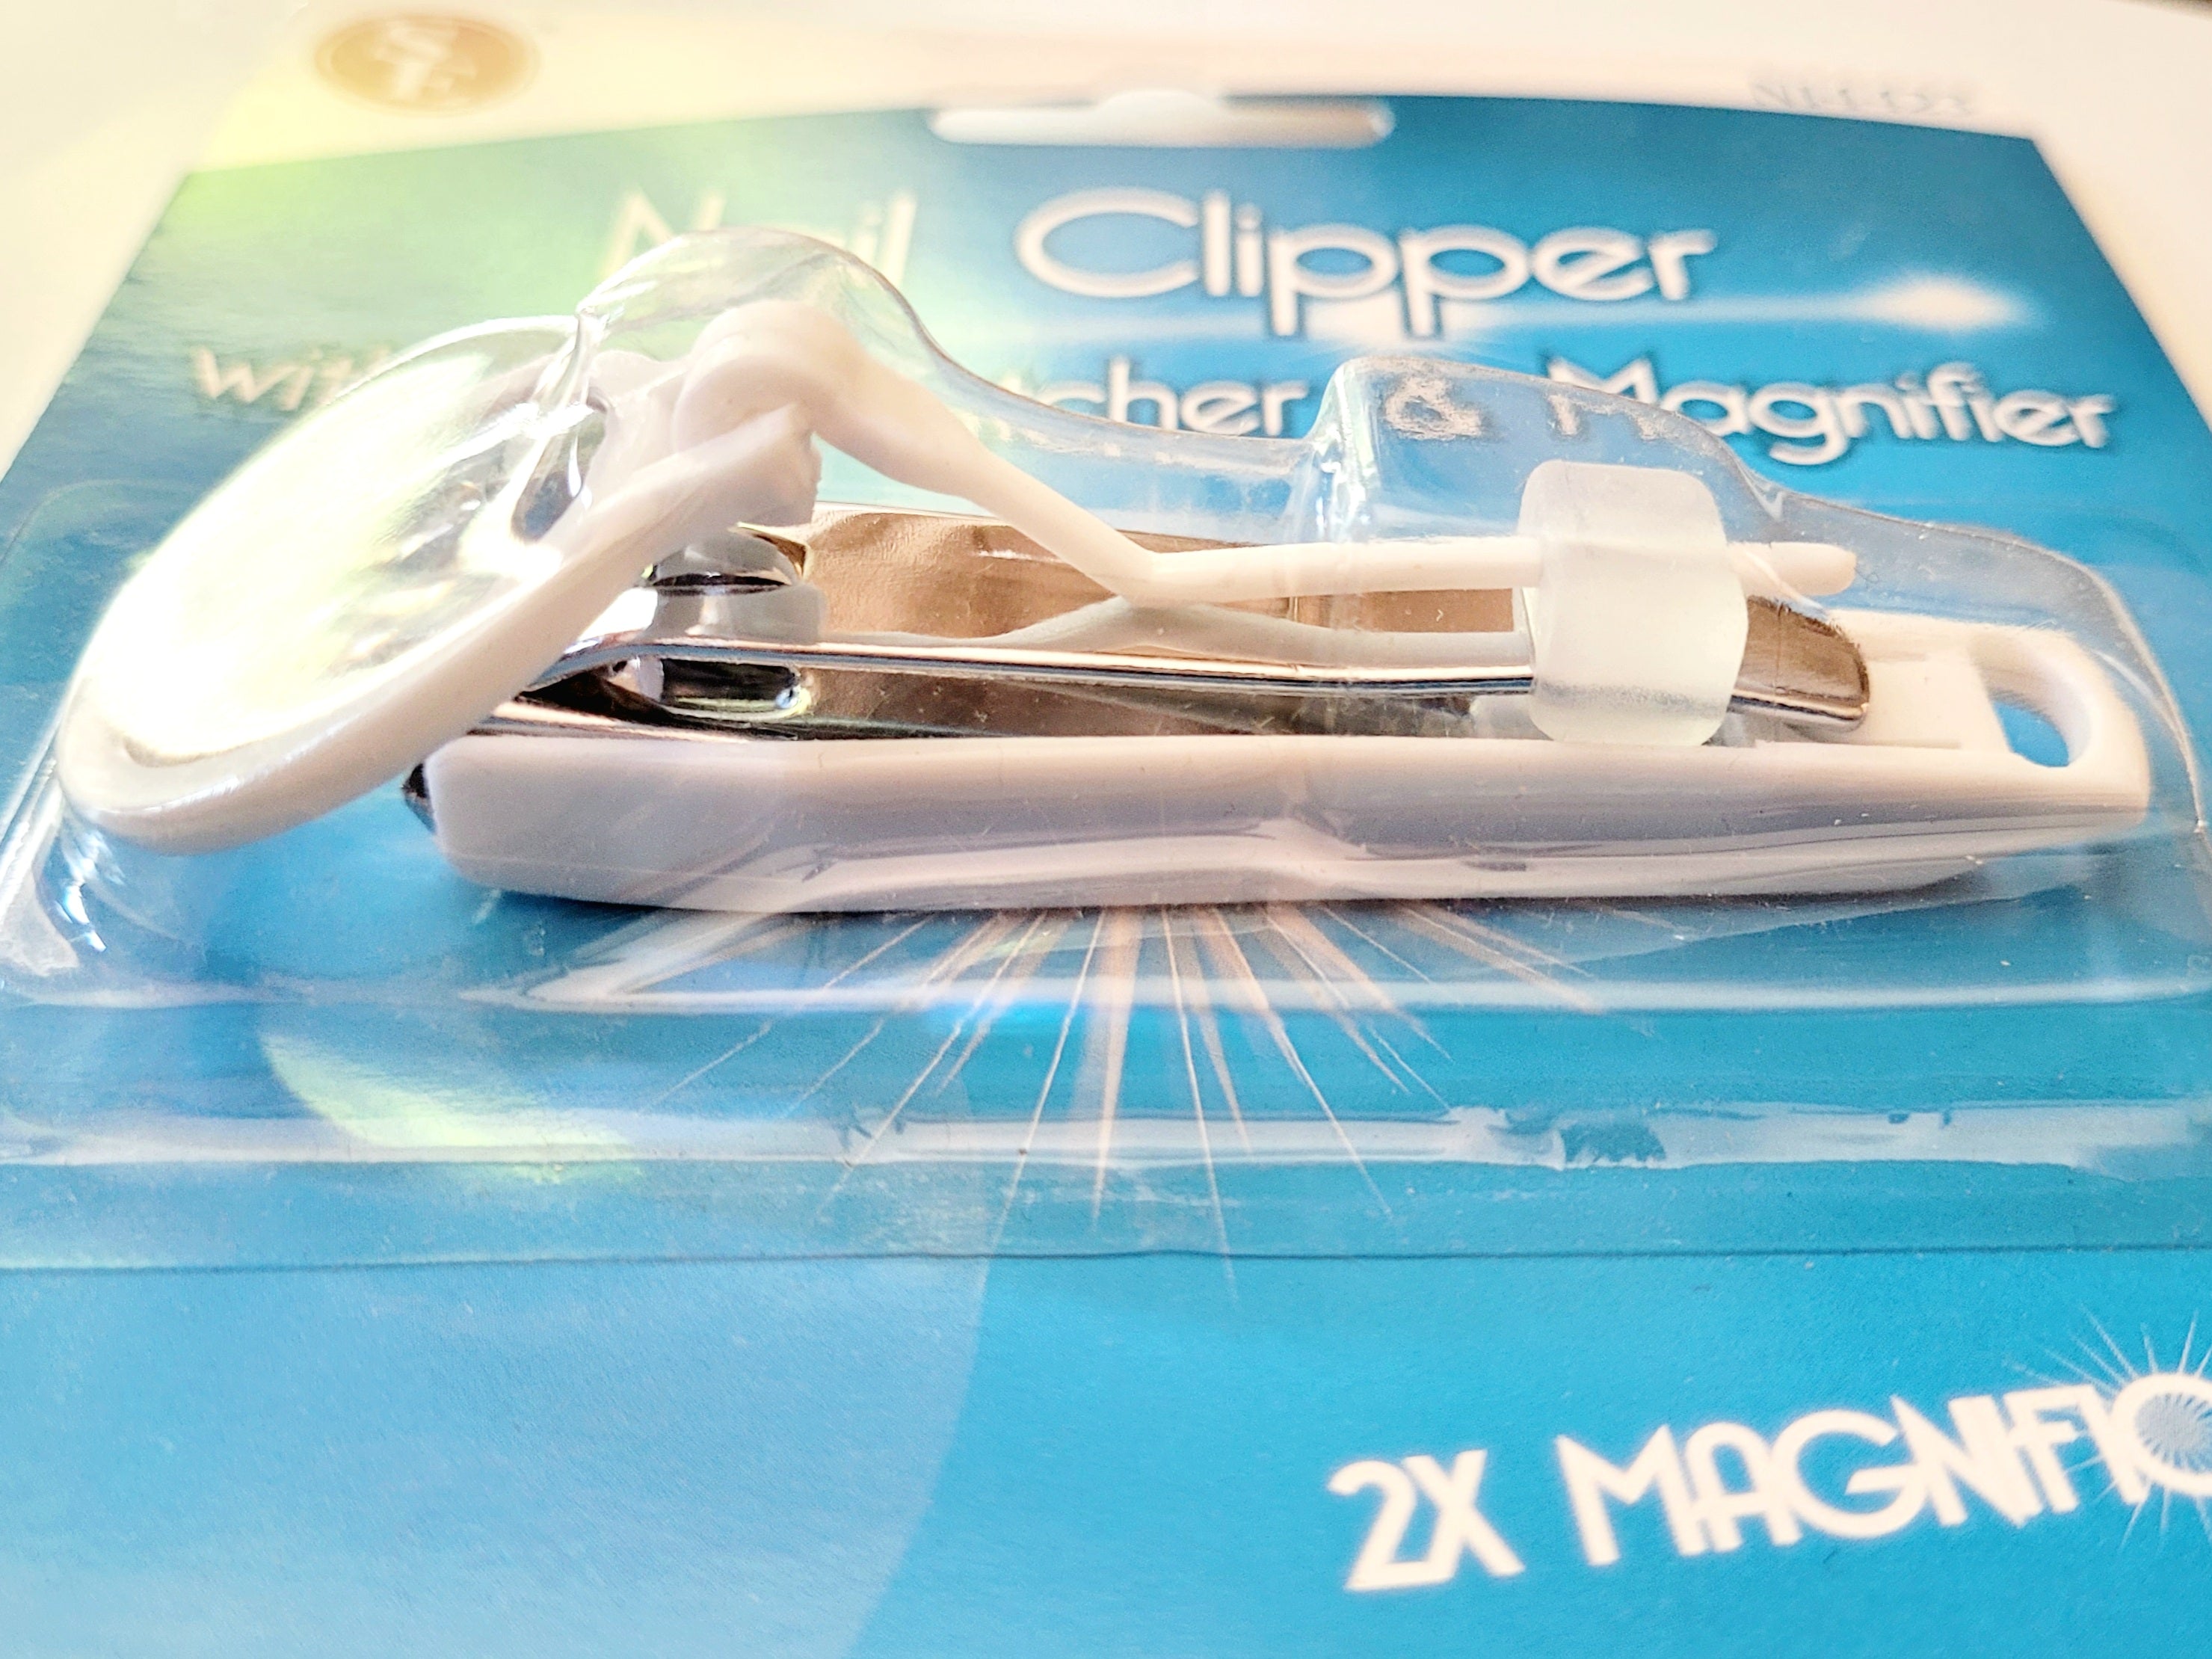 Nail clipper white large with magnifier and catcher